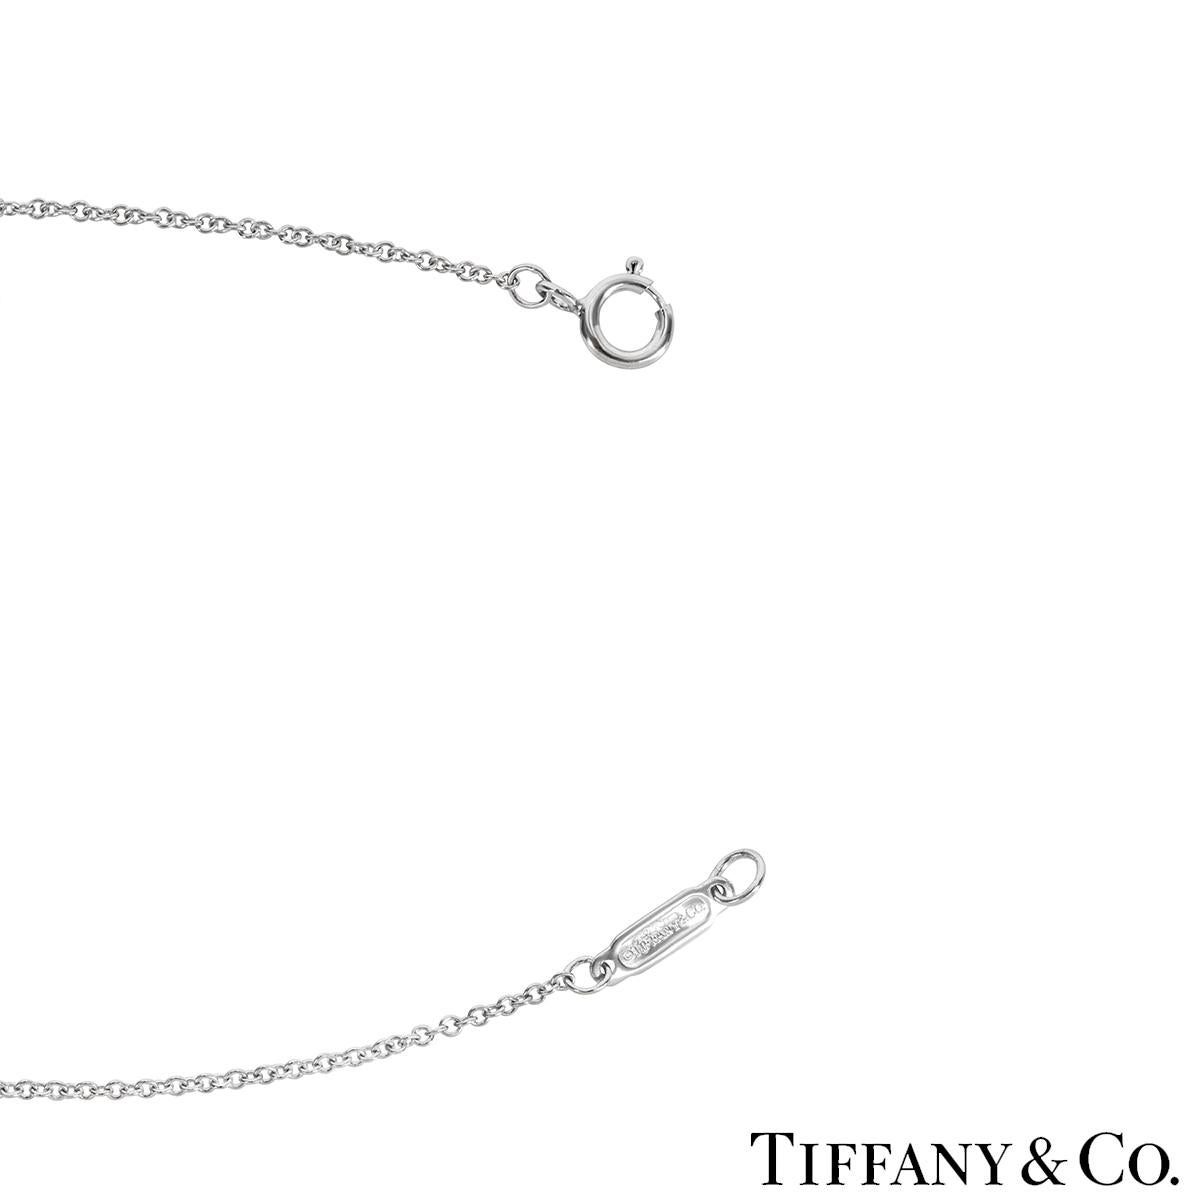 Tiffany & Co. Platinum Diamond Circlet Pendant In Excellent Condition For Sale In London, GB